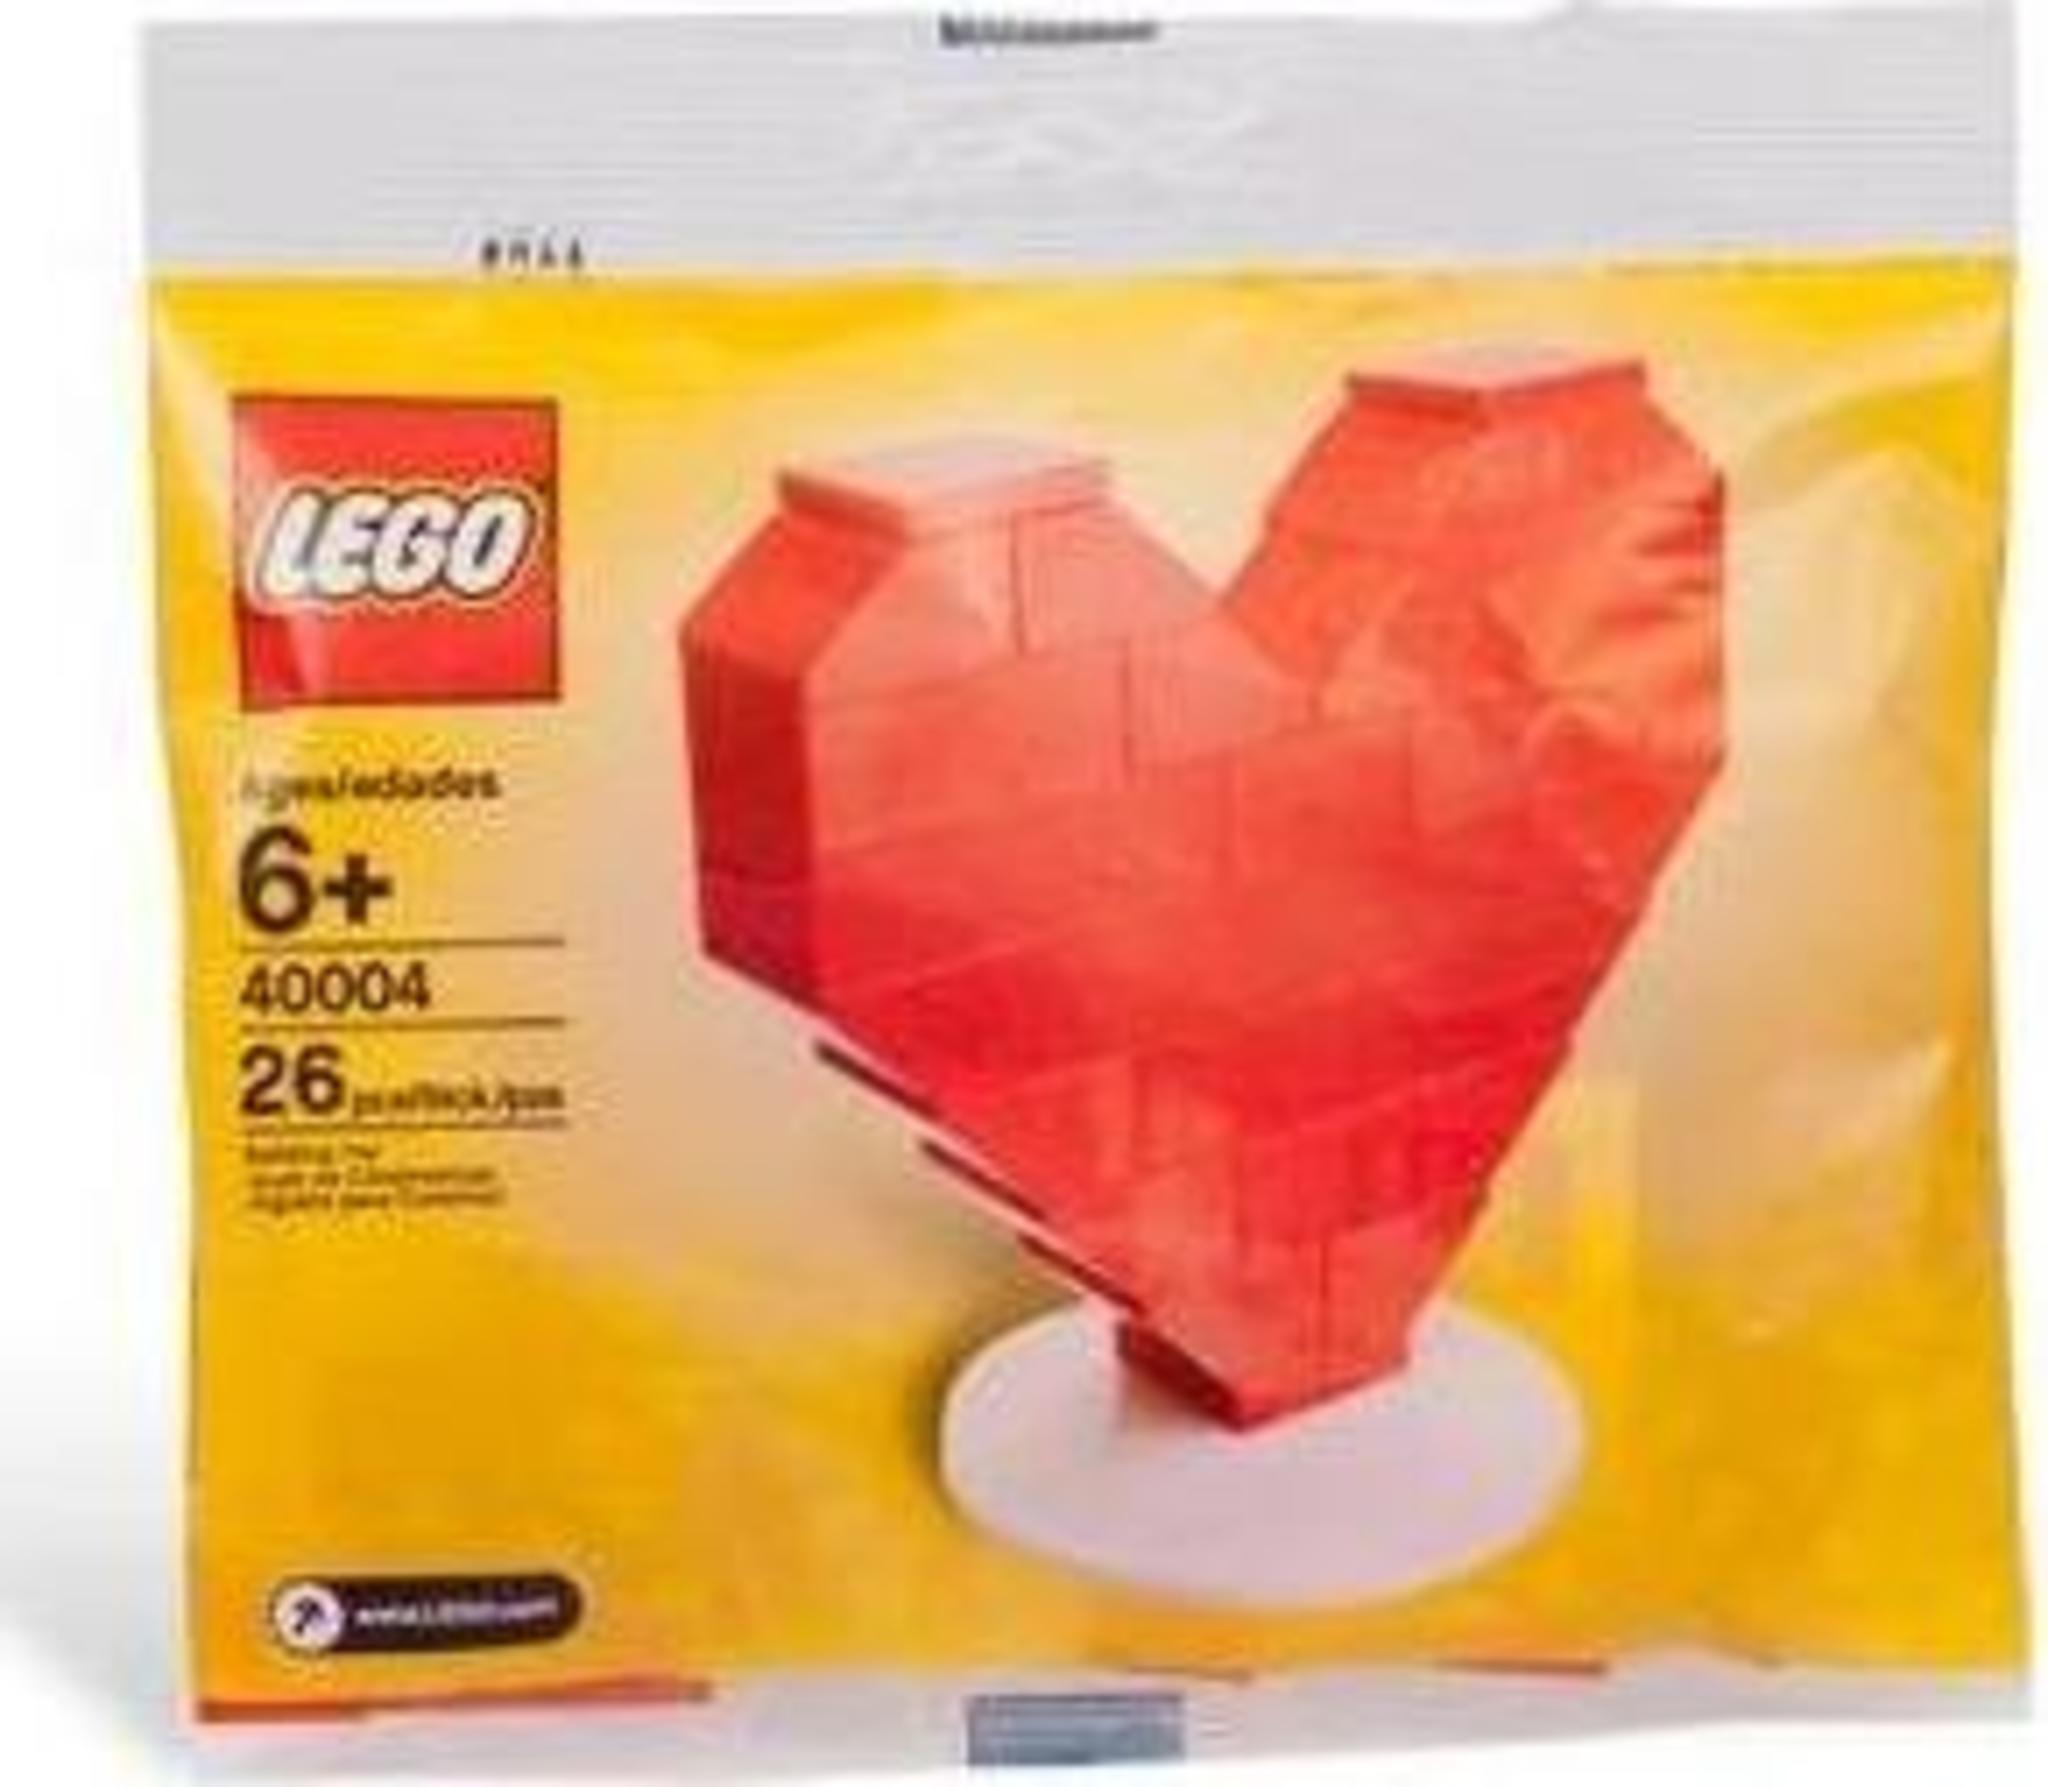 LEGO Stagionale 40004 - Cuore